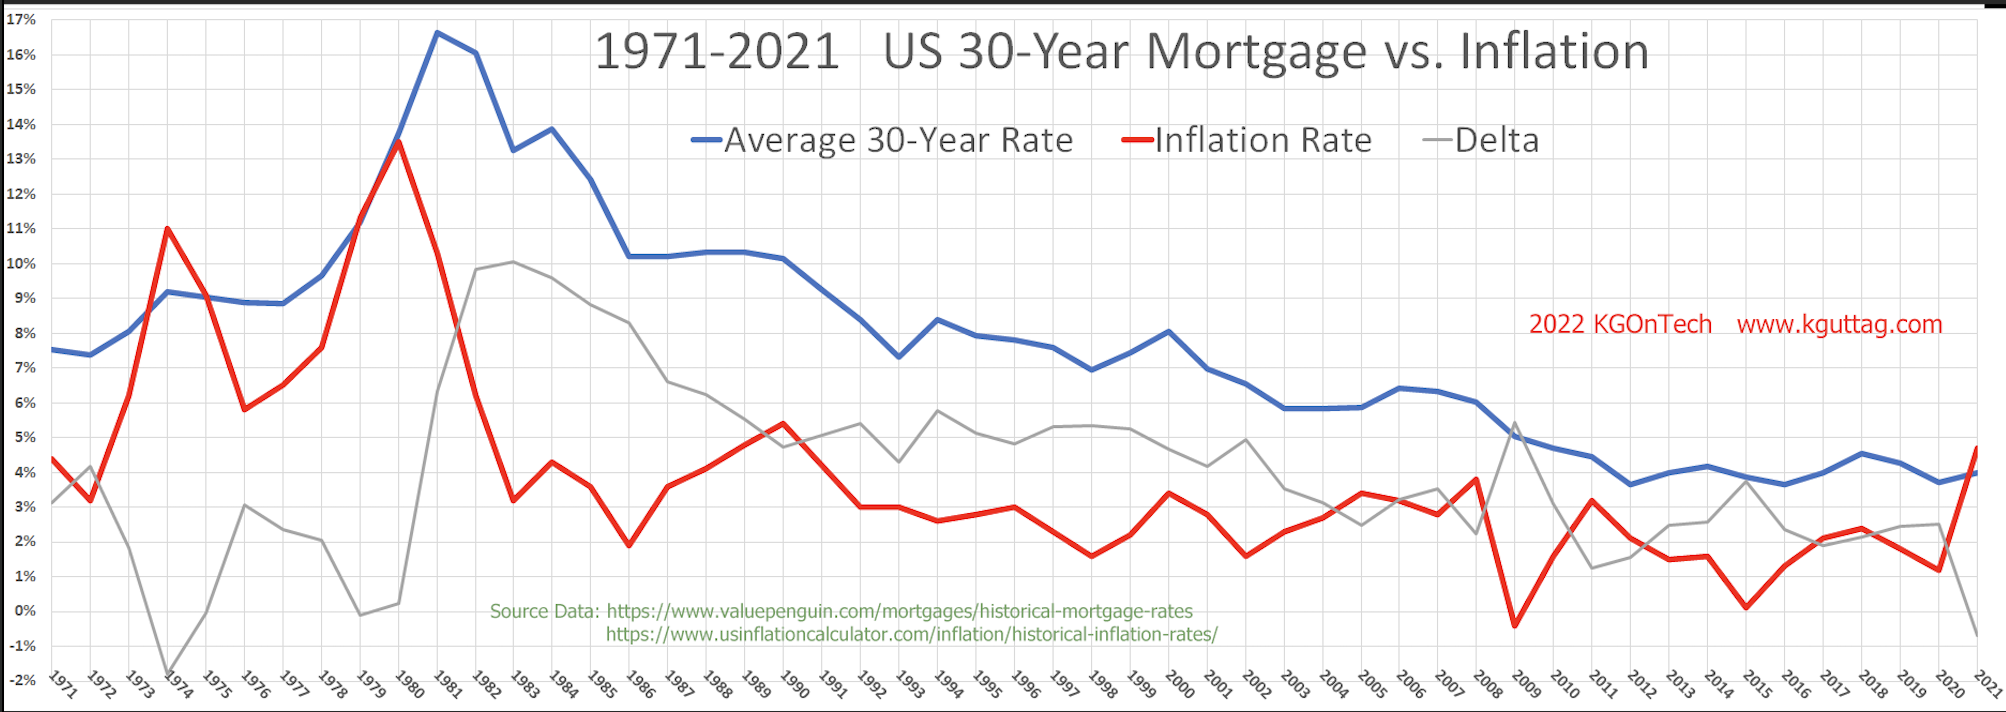 Inflation to Mortgage Rates